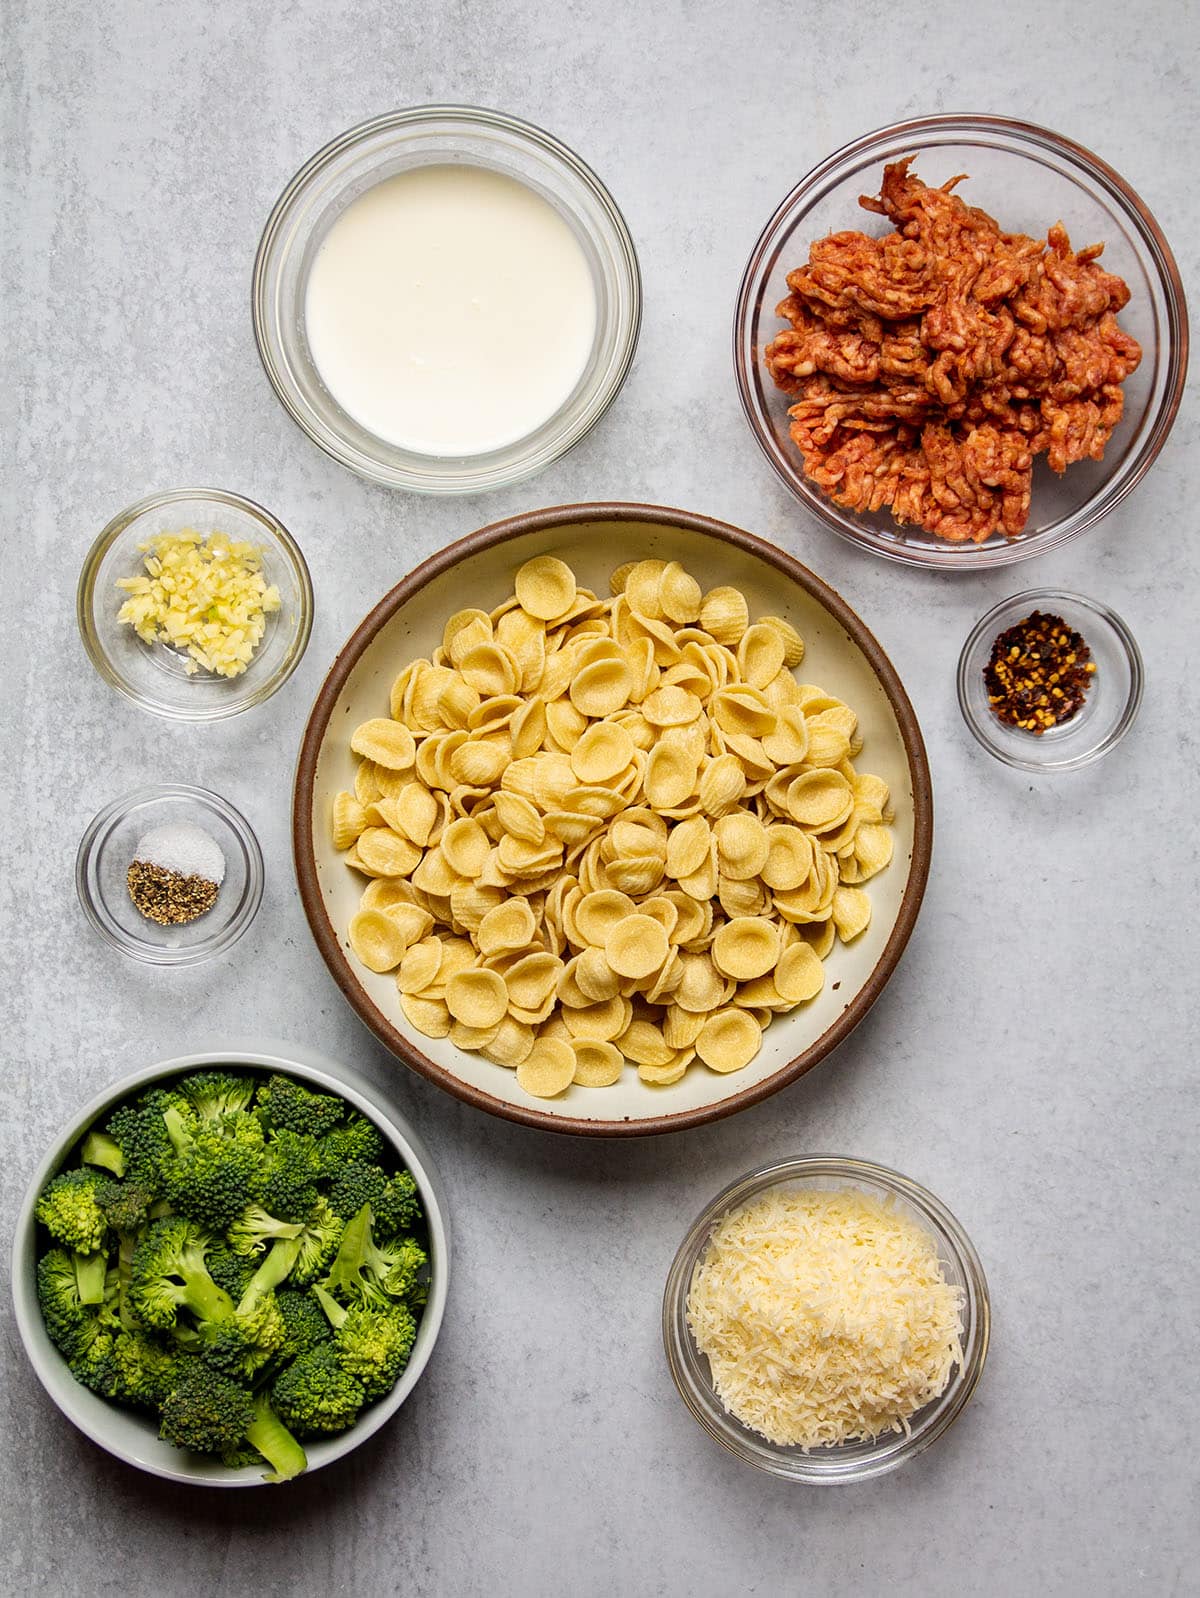 Pasta ingredients organized into individual bowls on a white table.